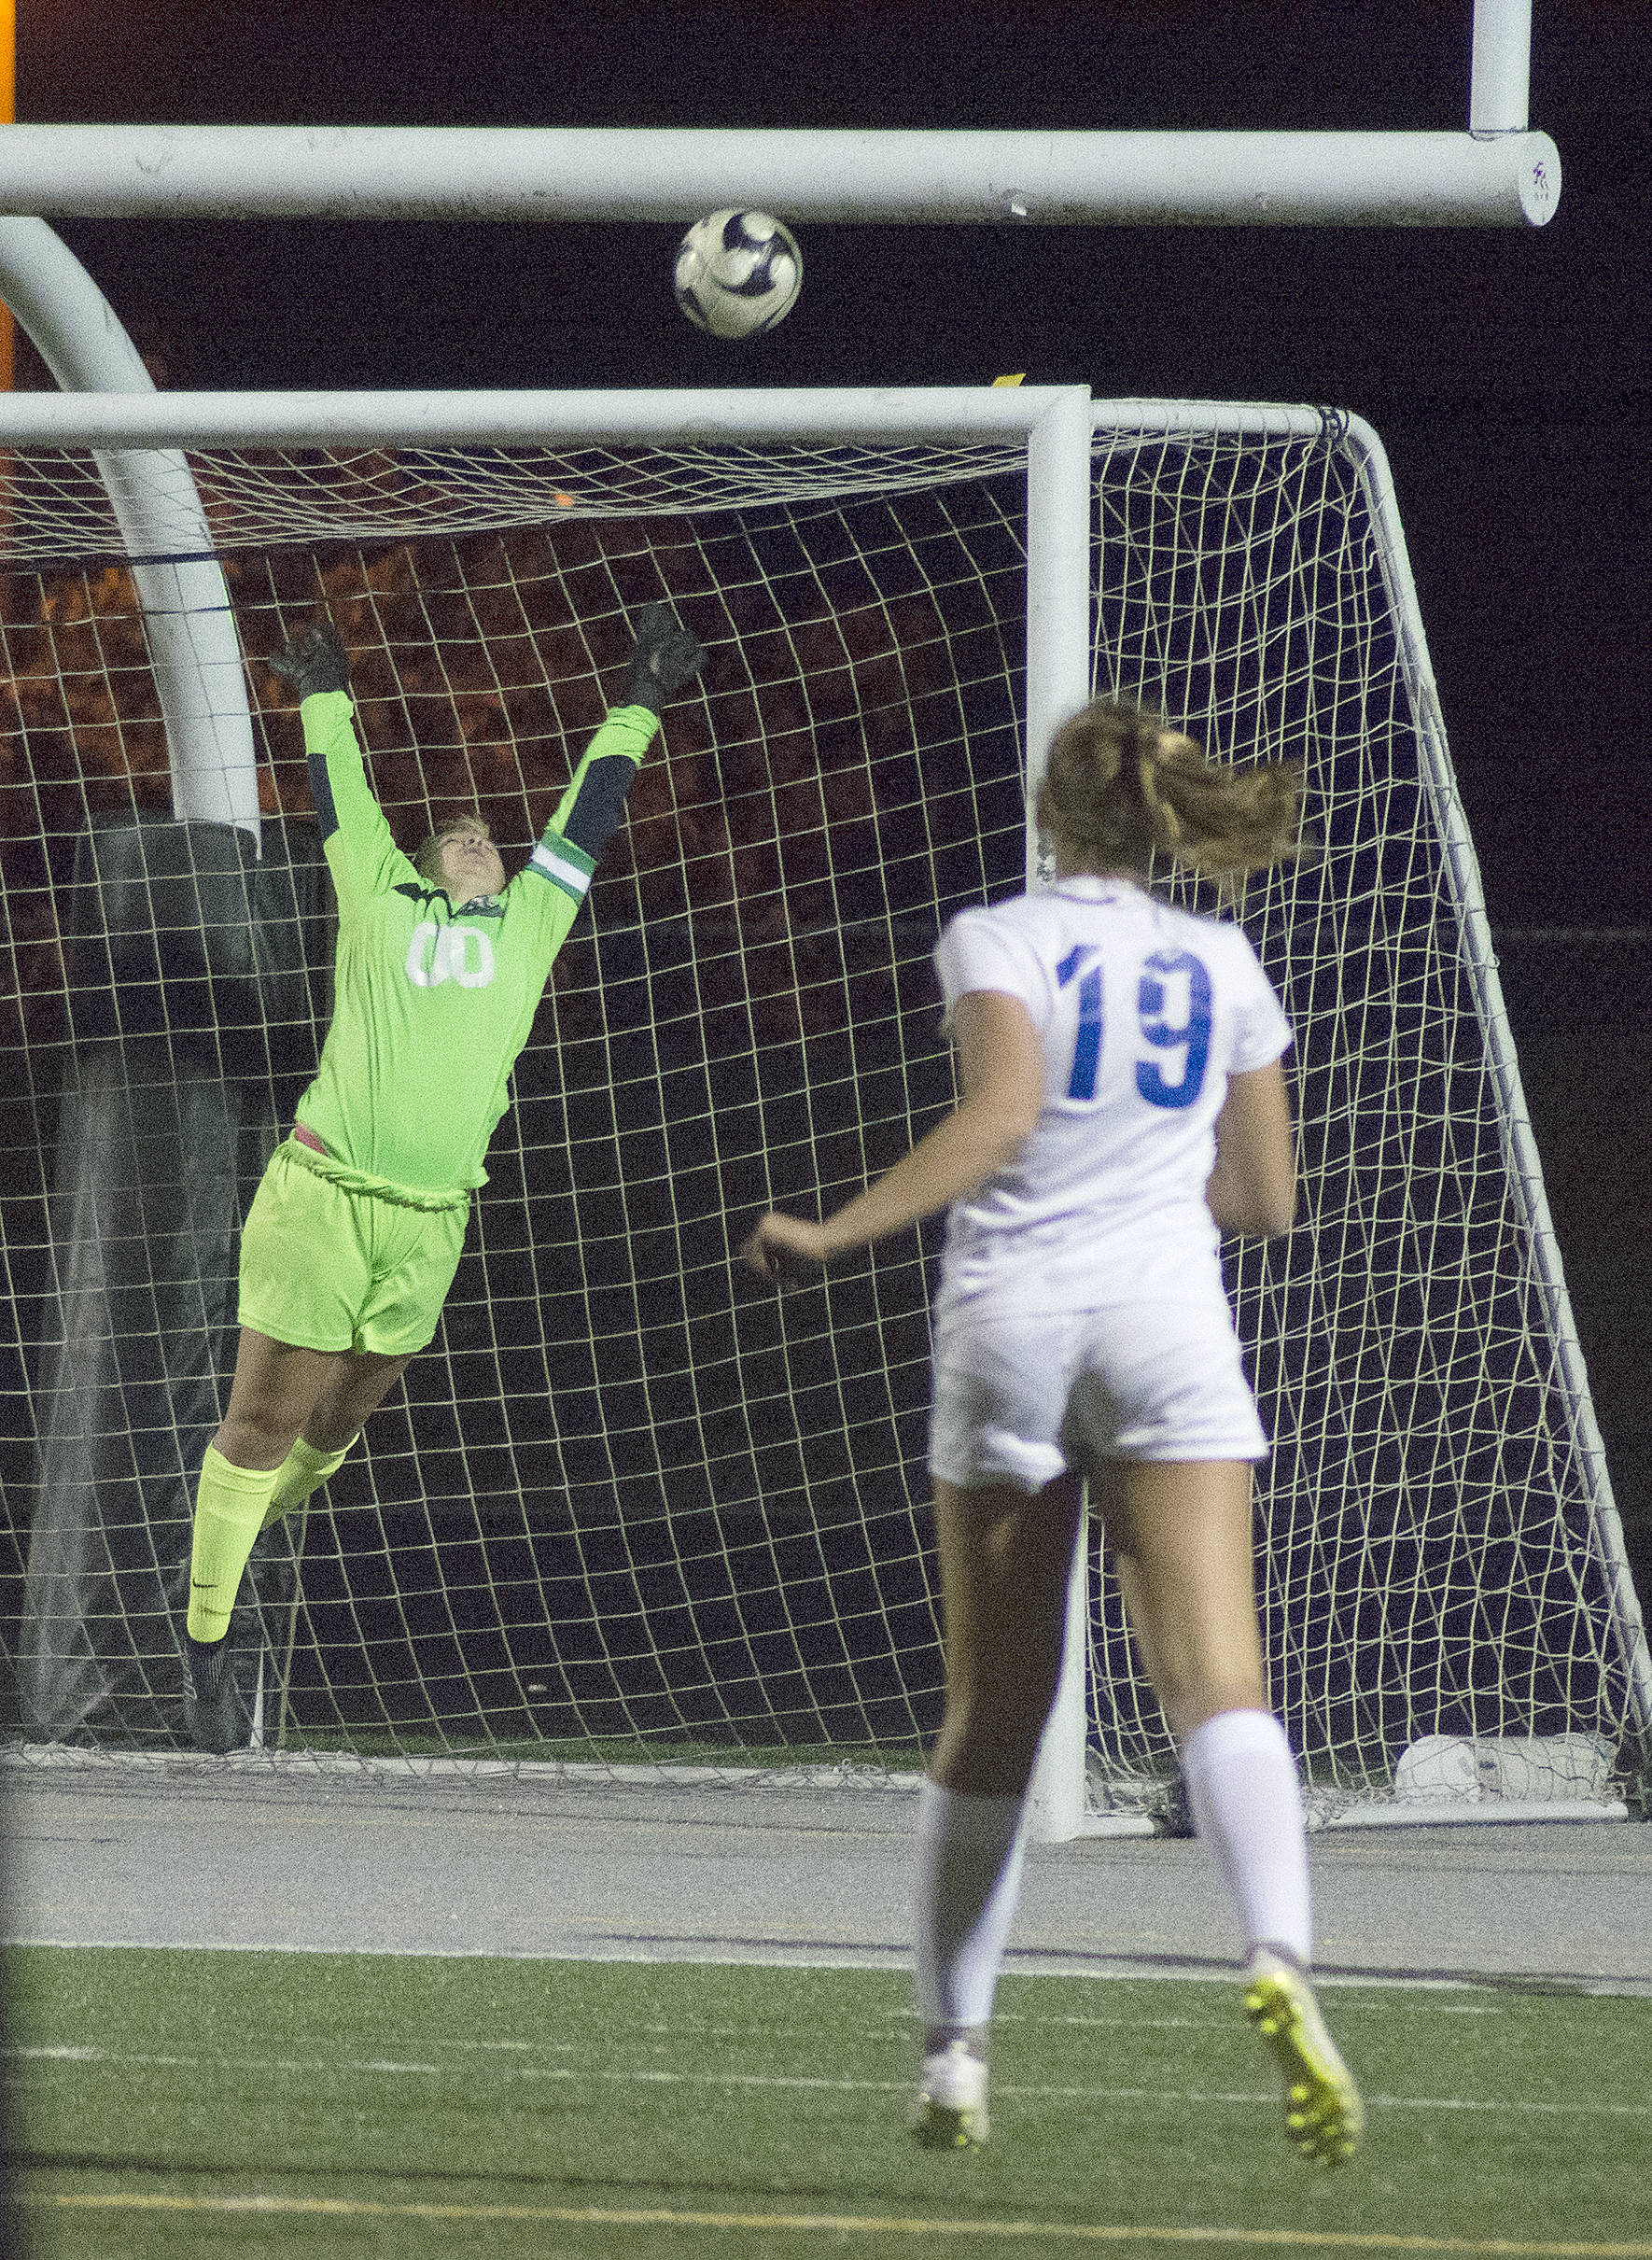 Photo by Kayse Angel                                Hazen and Kentwood battled it out Tuesday in Covington. The Conquerors scored a late goal to win the match 1-0. The loss is Hazen’s first of the season.